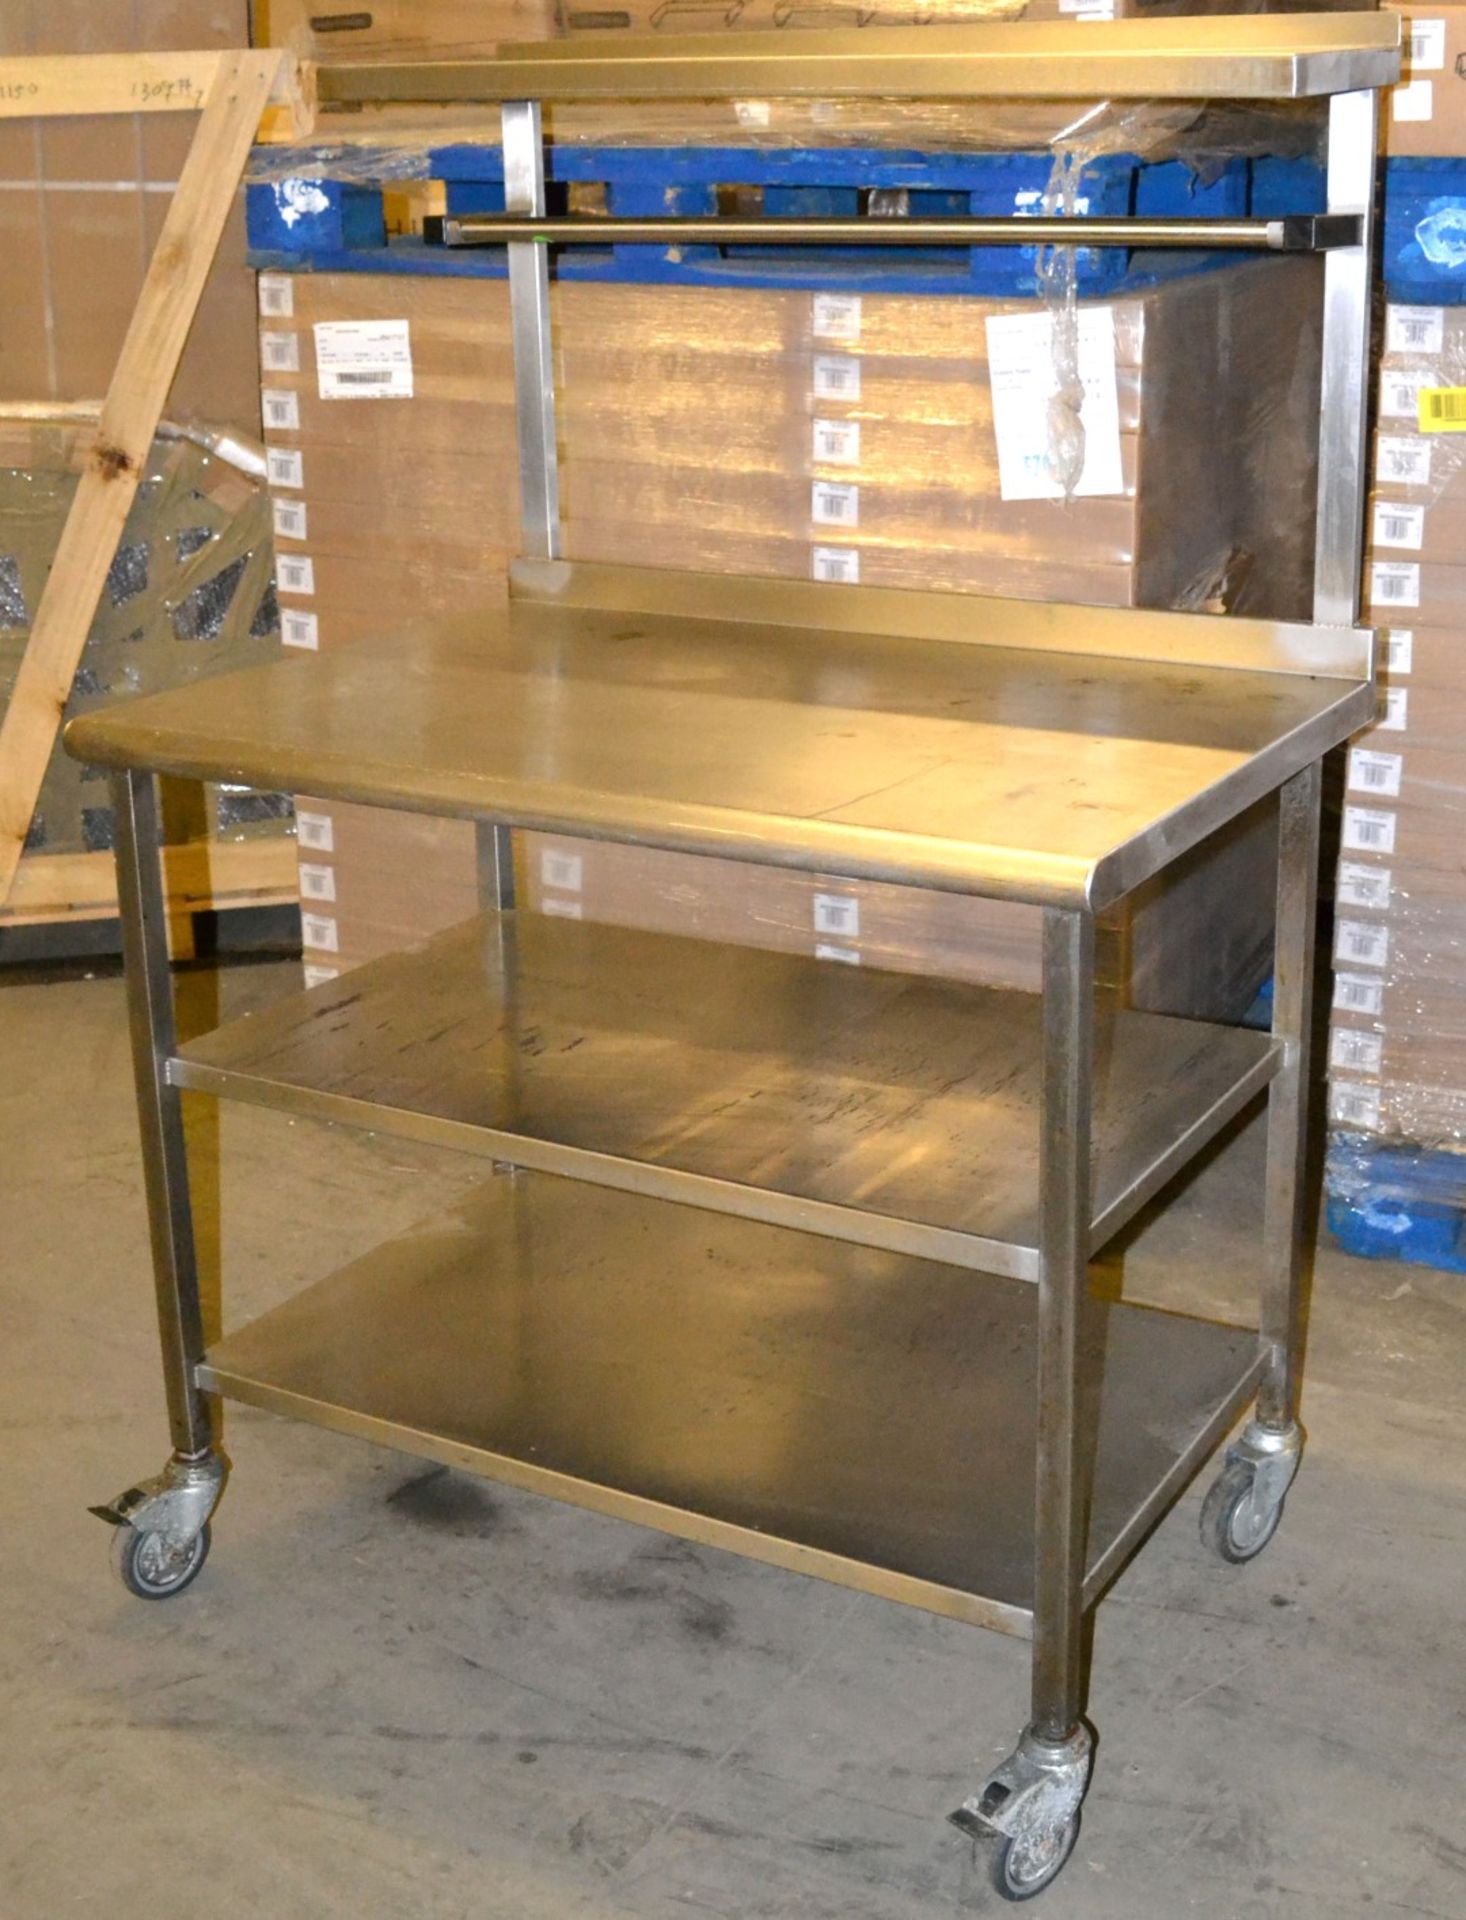 1 x Wheeled Stainless Steel Prep Table - Dimensions: 100 x 69.5 x 148cm - Ref: MC120 - CL282 - Locat - Image 5 of 11